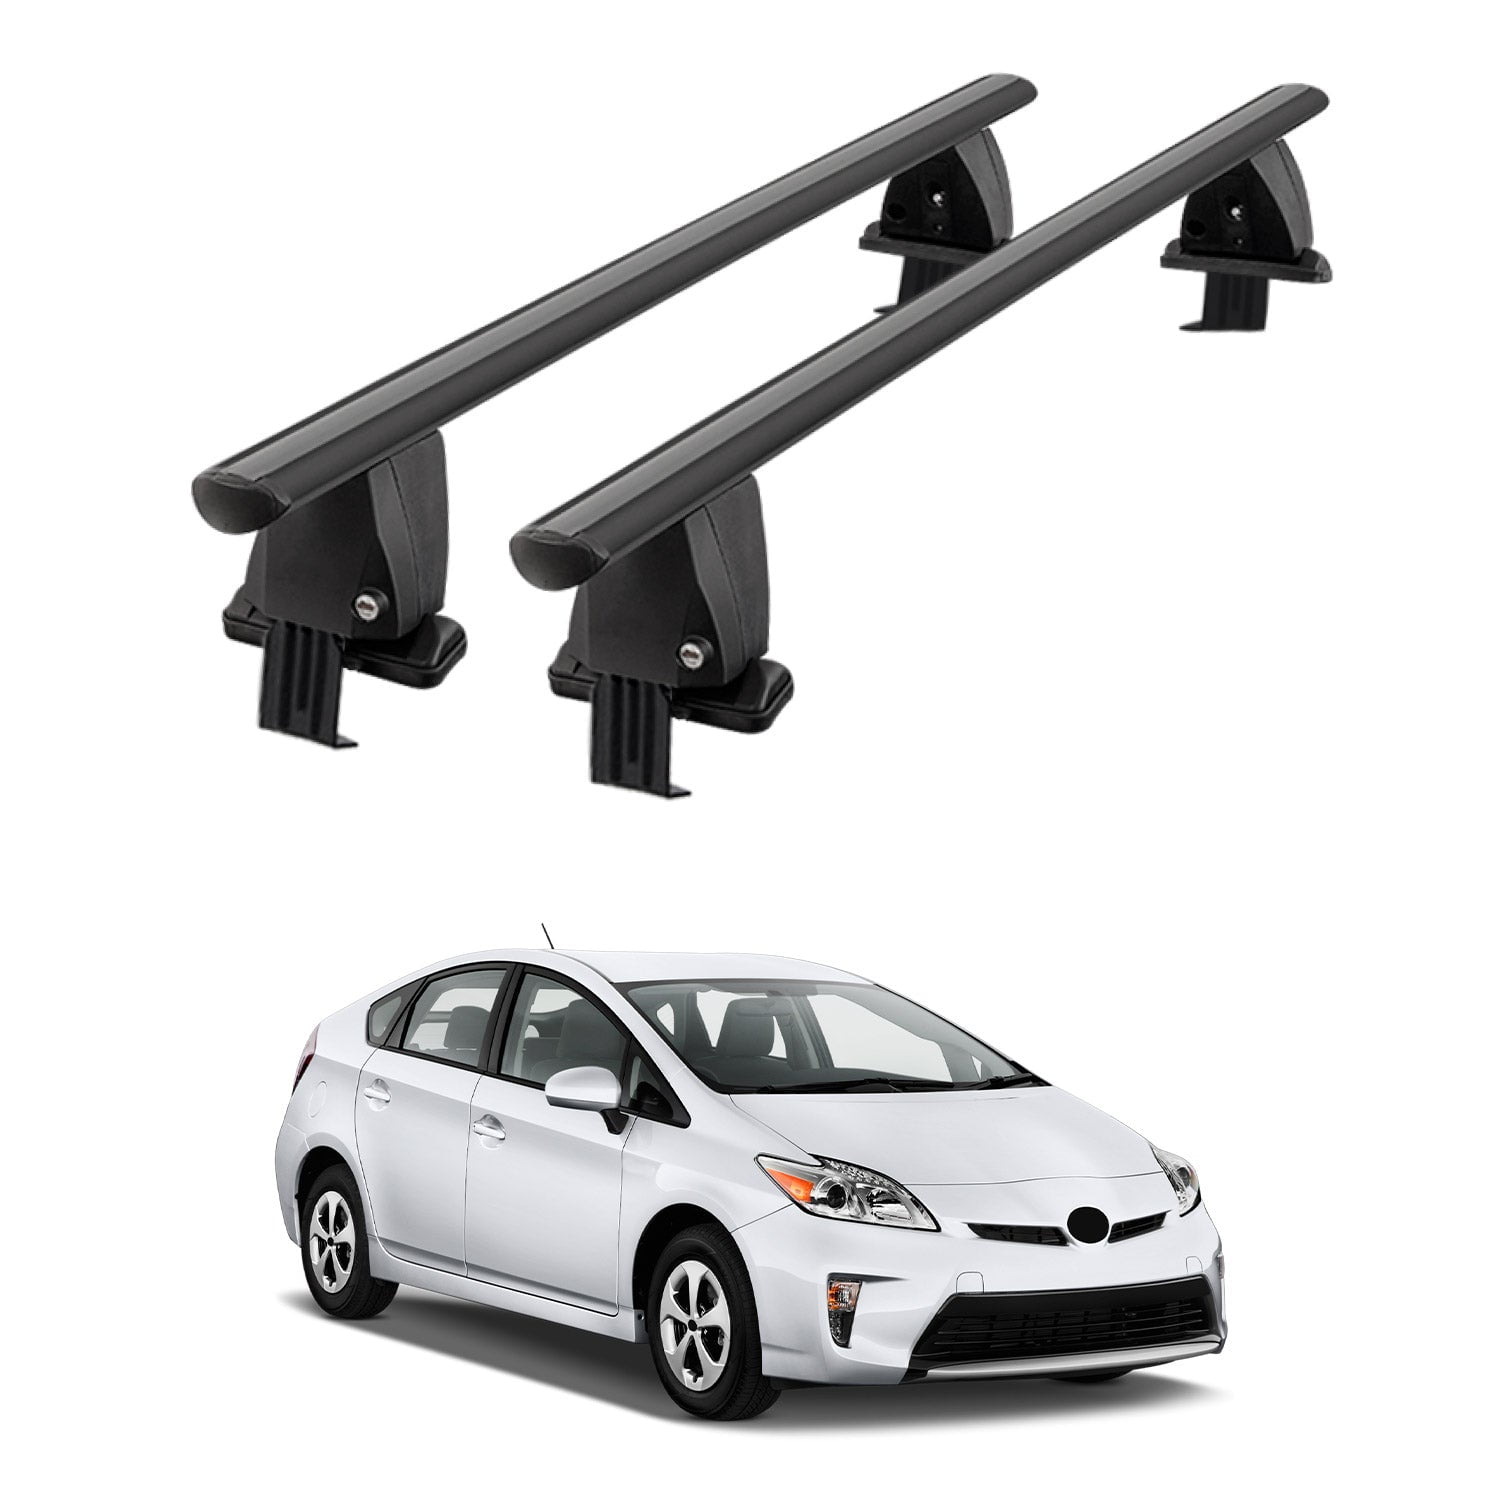 Smooth Top Roof Rack for Toyota Prius 2010-2015 Cross Bars Luggage ...